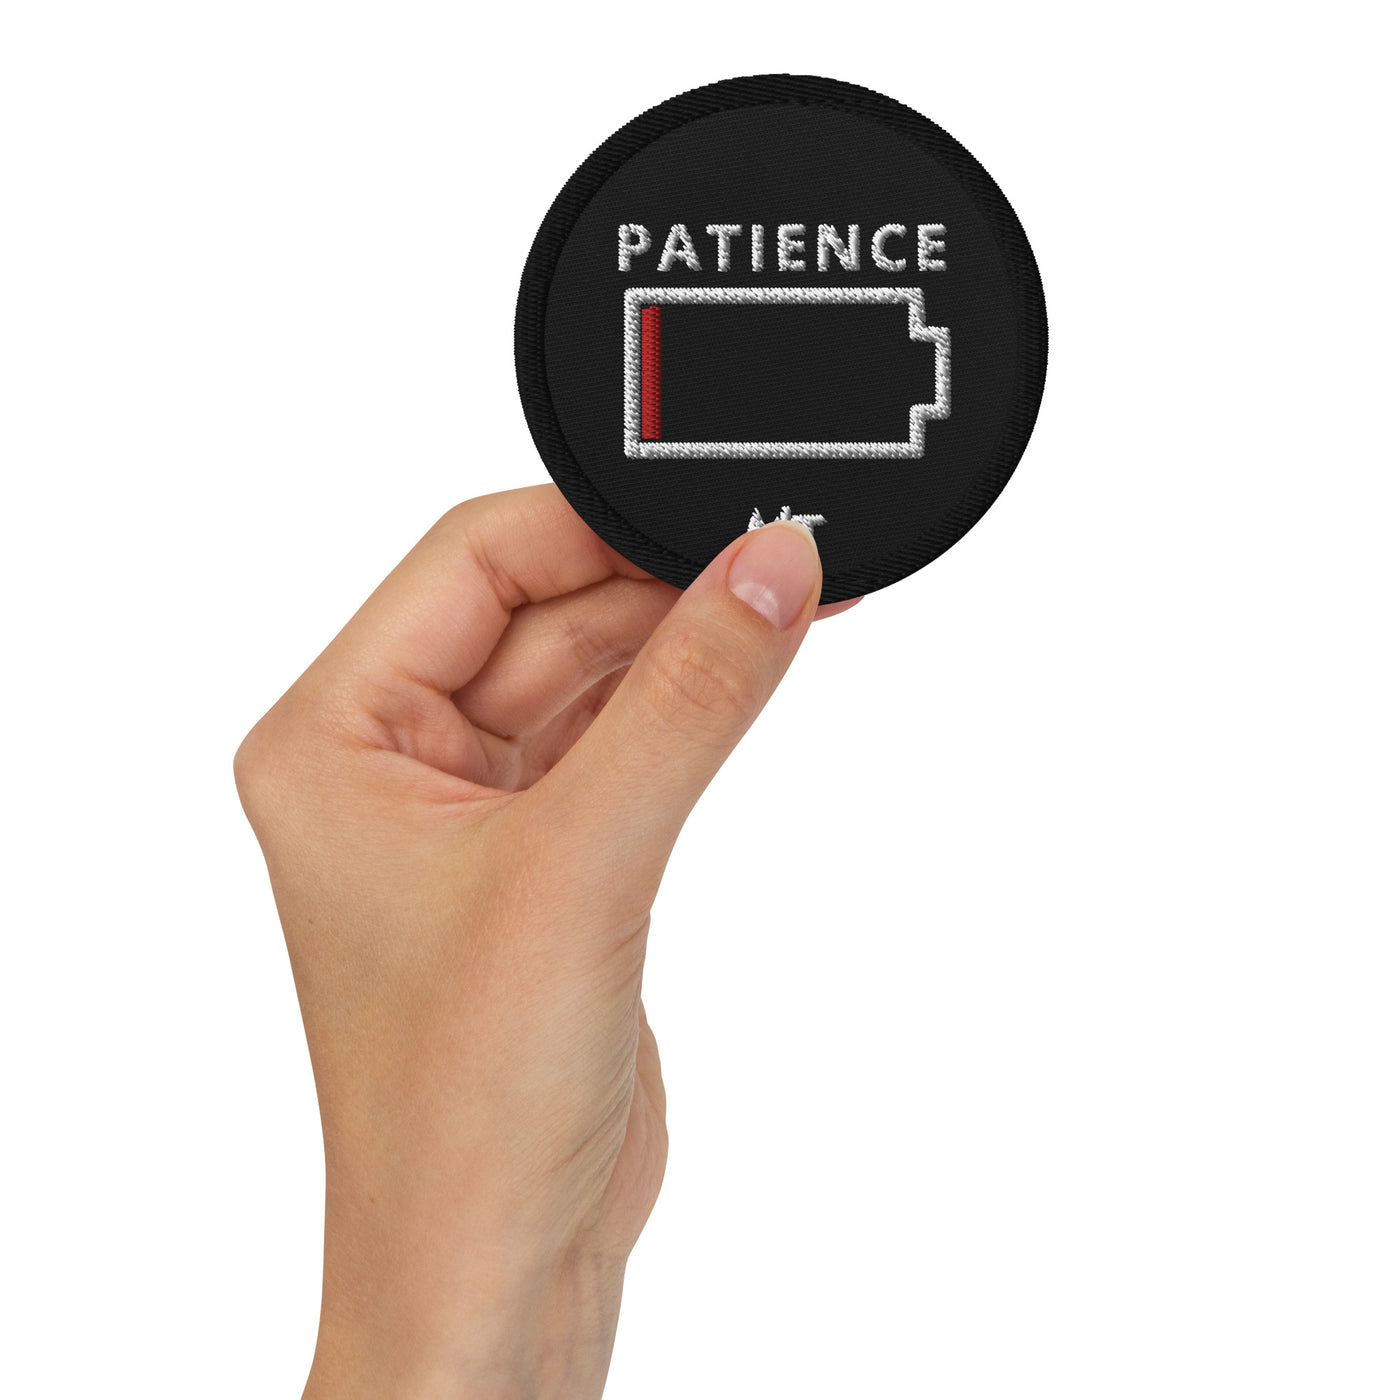 Patience - Embroidered patches